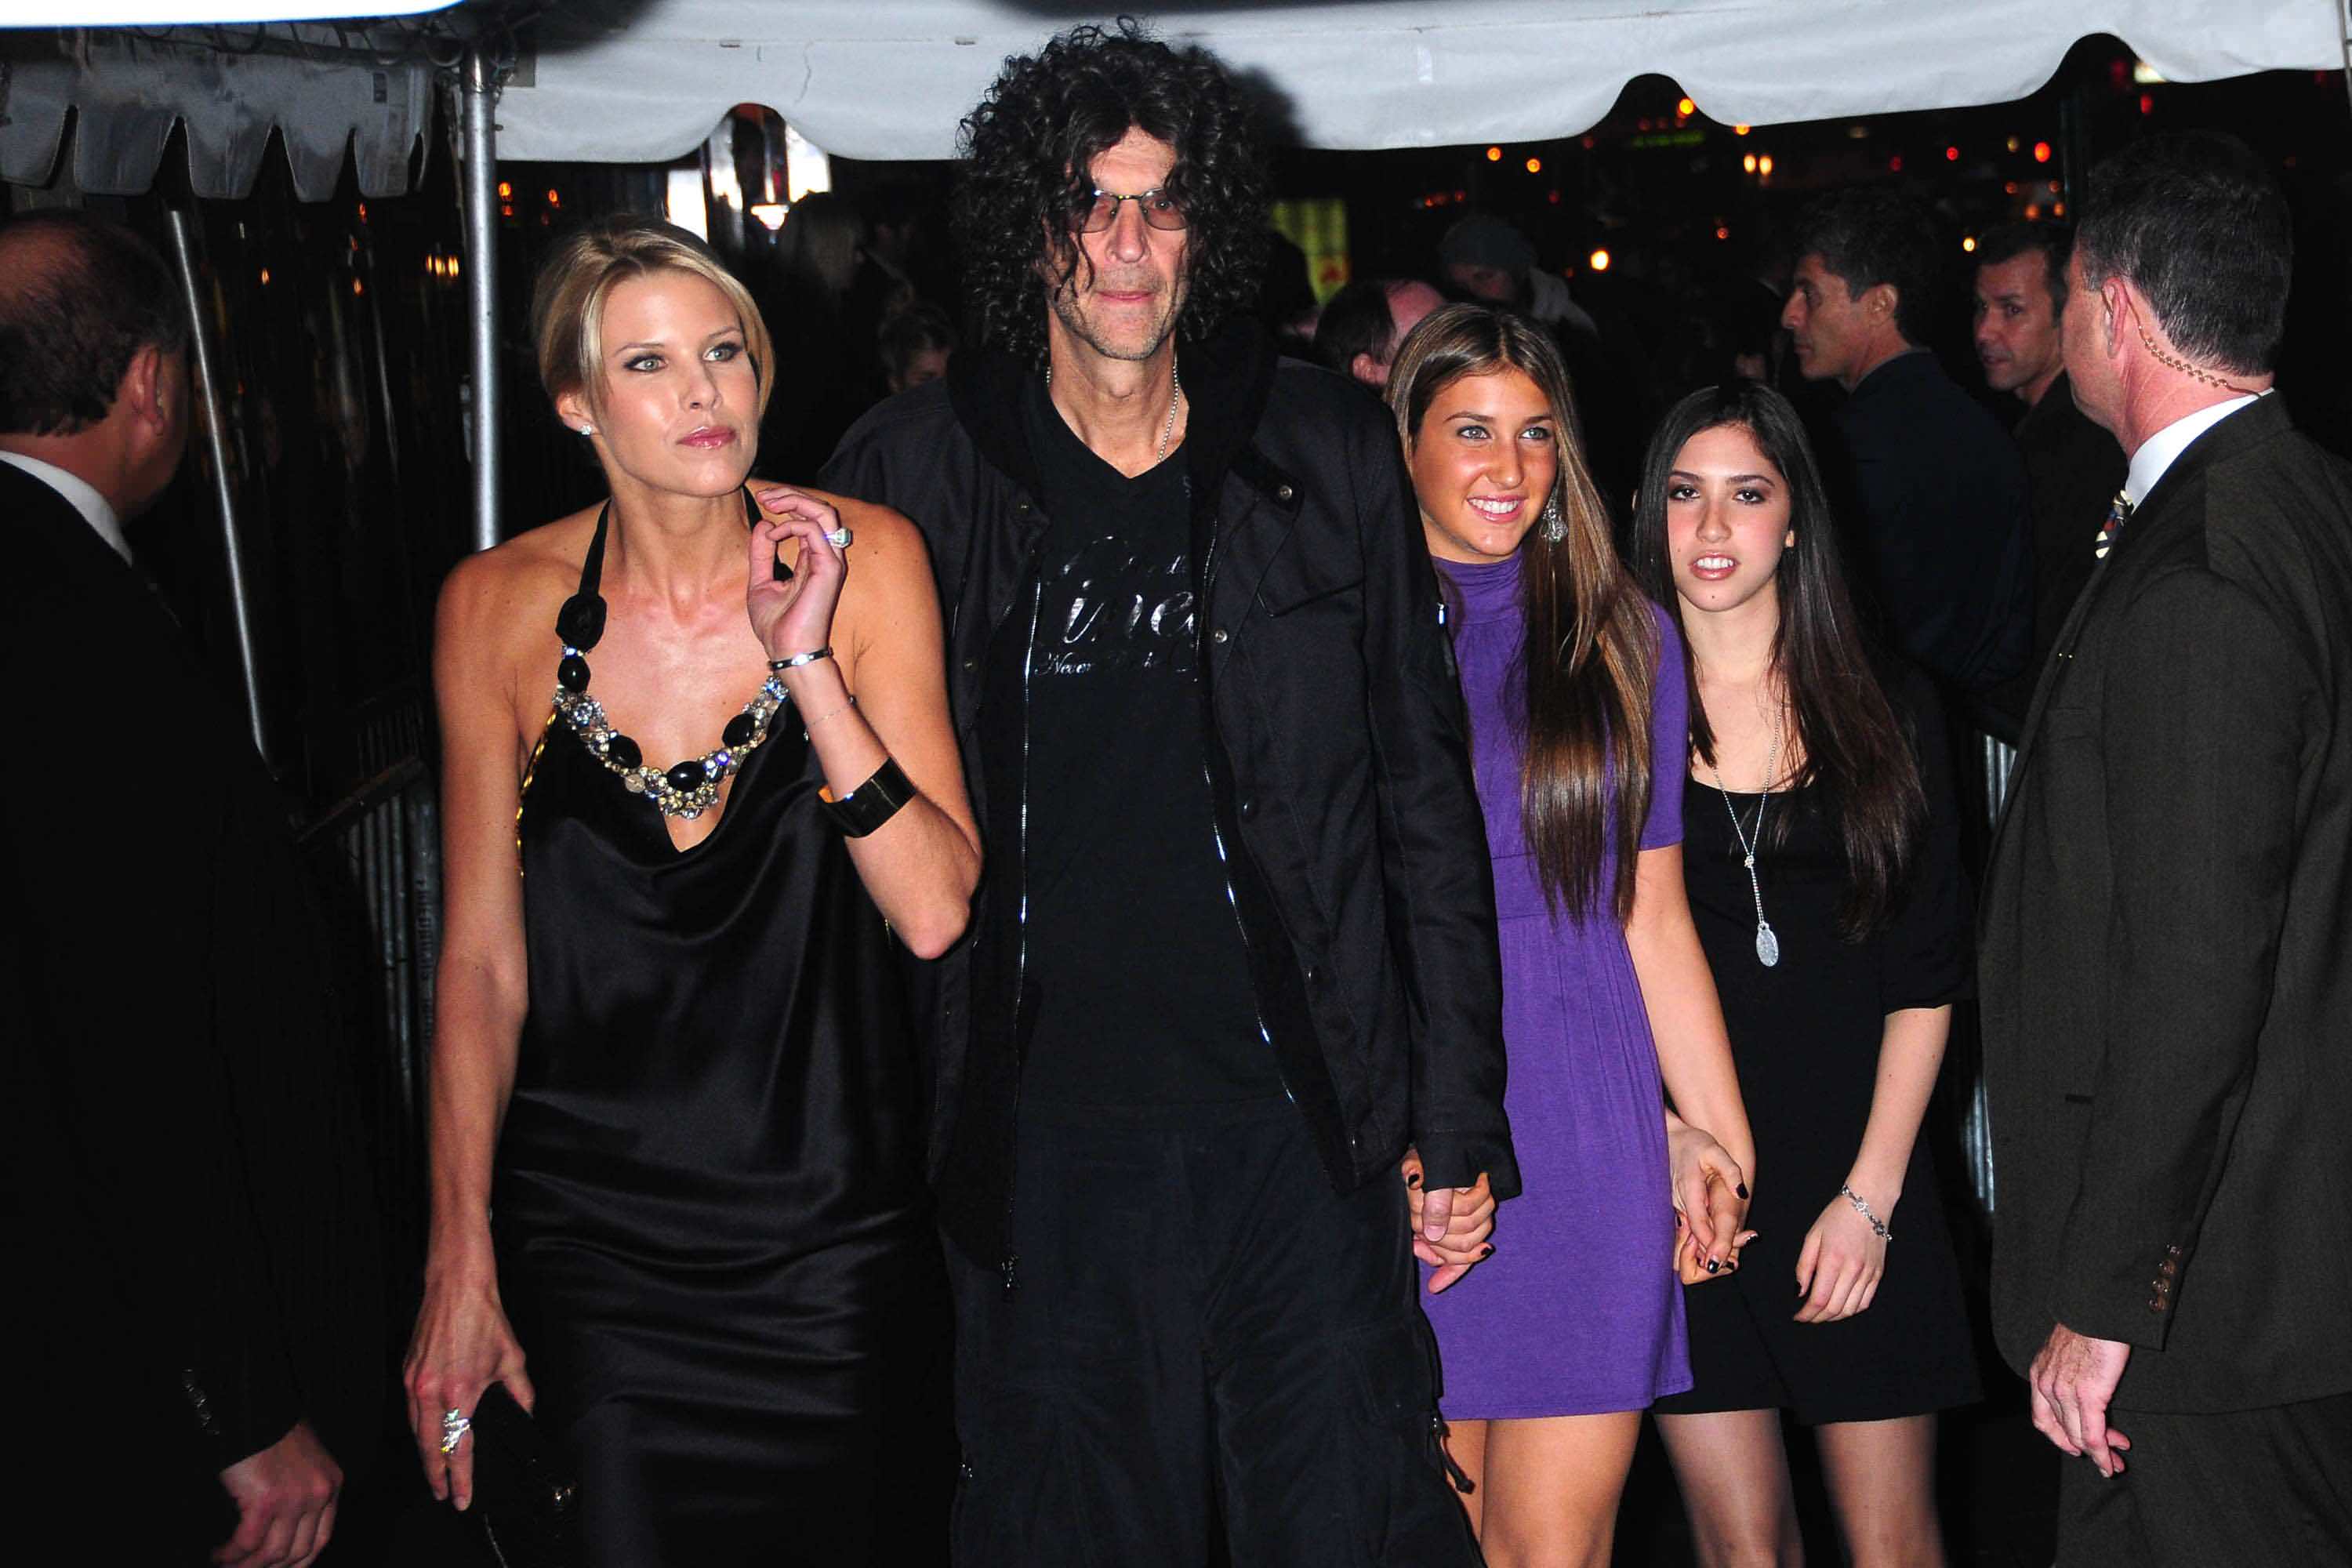 Howard Stern attends a film premier with his wife Beth Ostrosky (left) and his daughters Ashley (second from right) and Debra (far right) from his first marriage. Beth is only 11 years older than his eldest daughter Emily (not pictured). The famous disc jockey is worth a ridiculous $600 million.